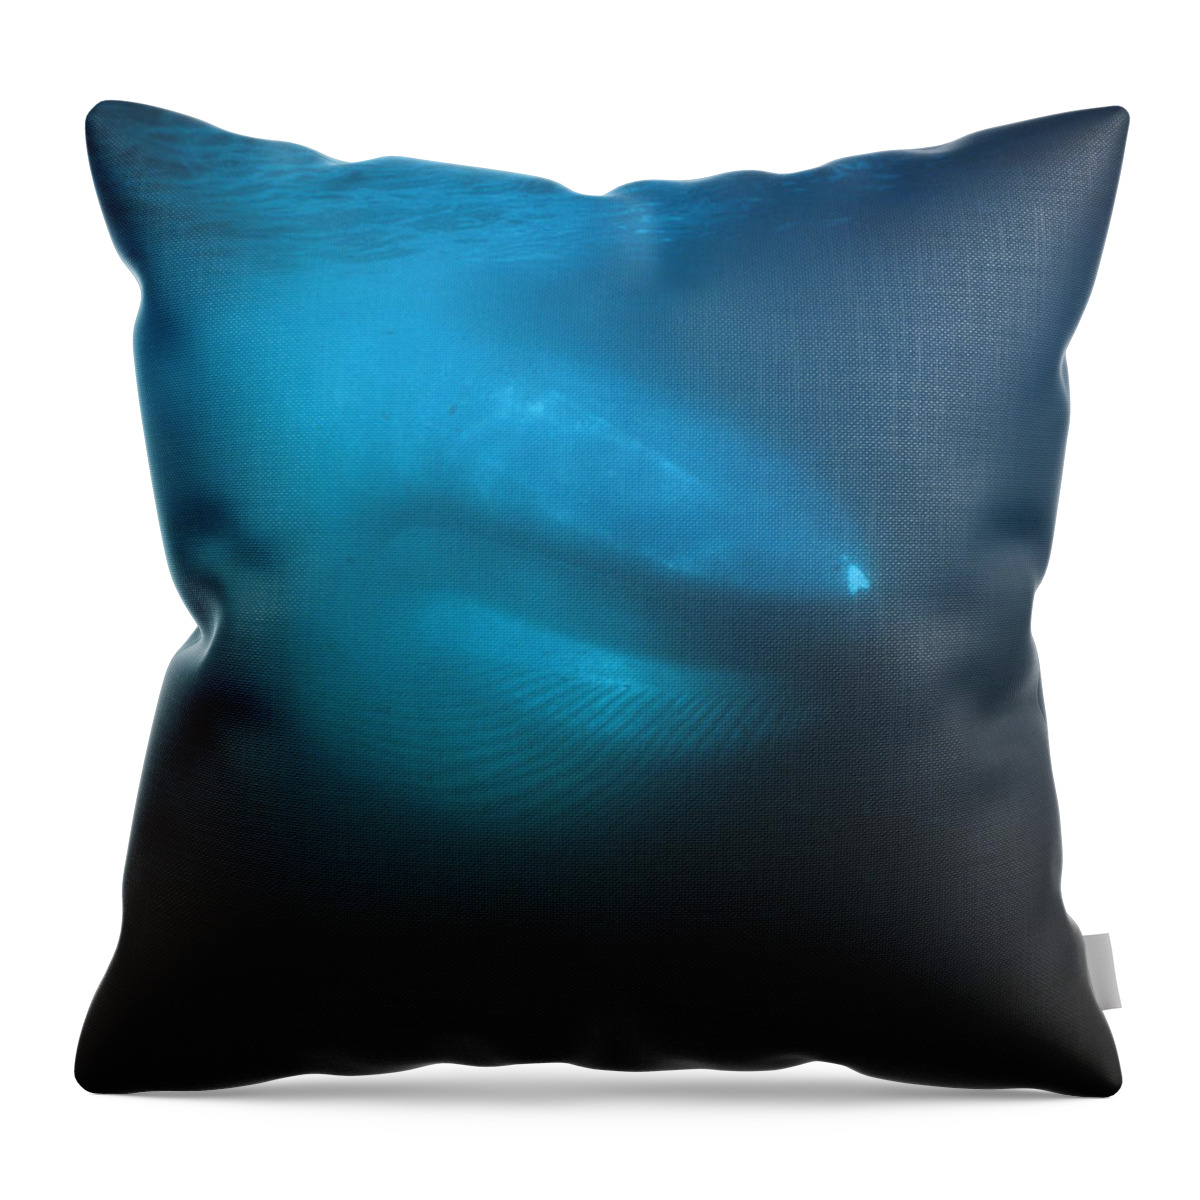 Feb0514 Throw Pillow featuring the photograph Blue Whale Filter Feeding Sea Of Cortez by Hiroya Minakuchi